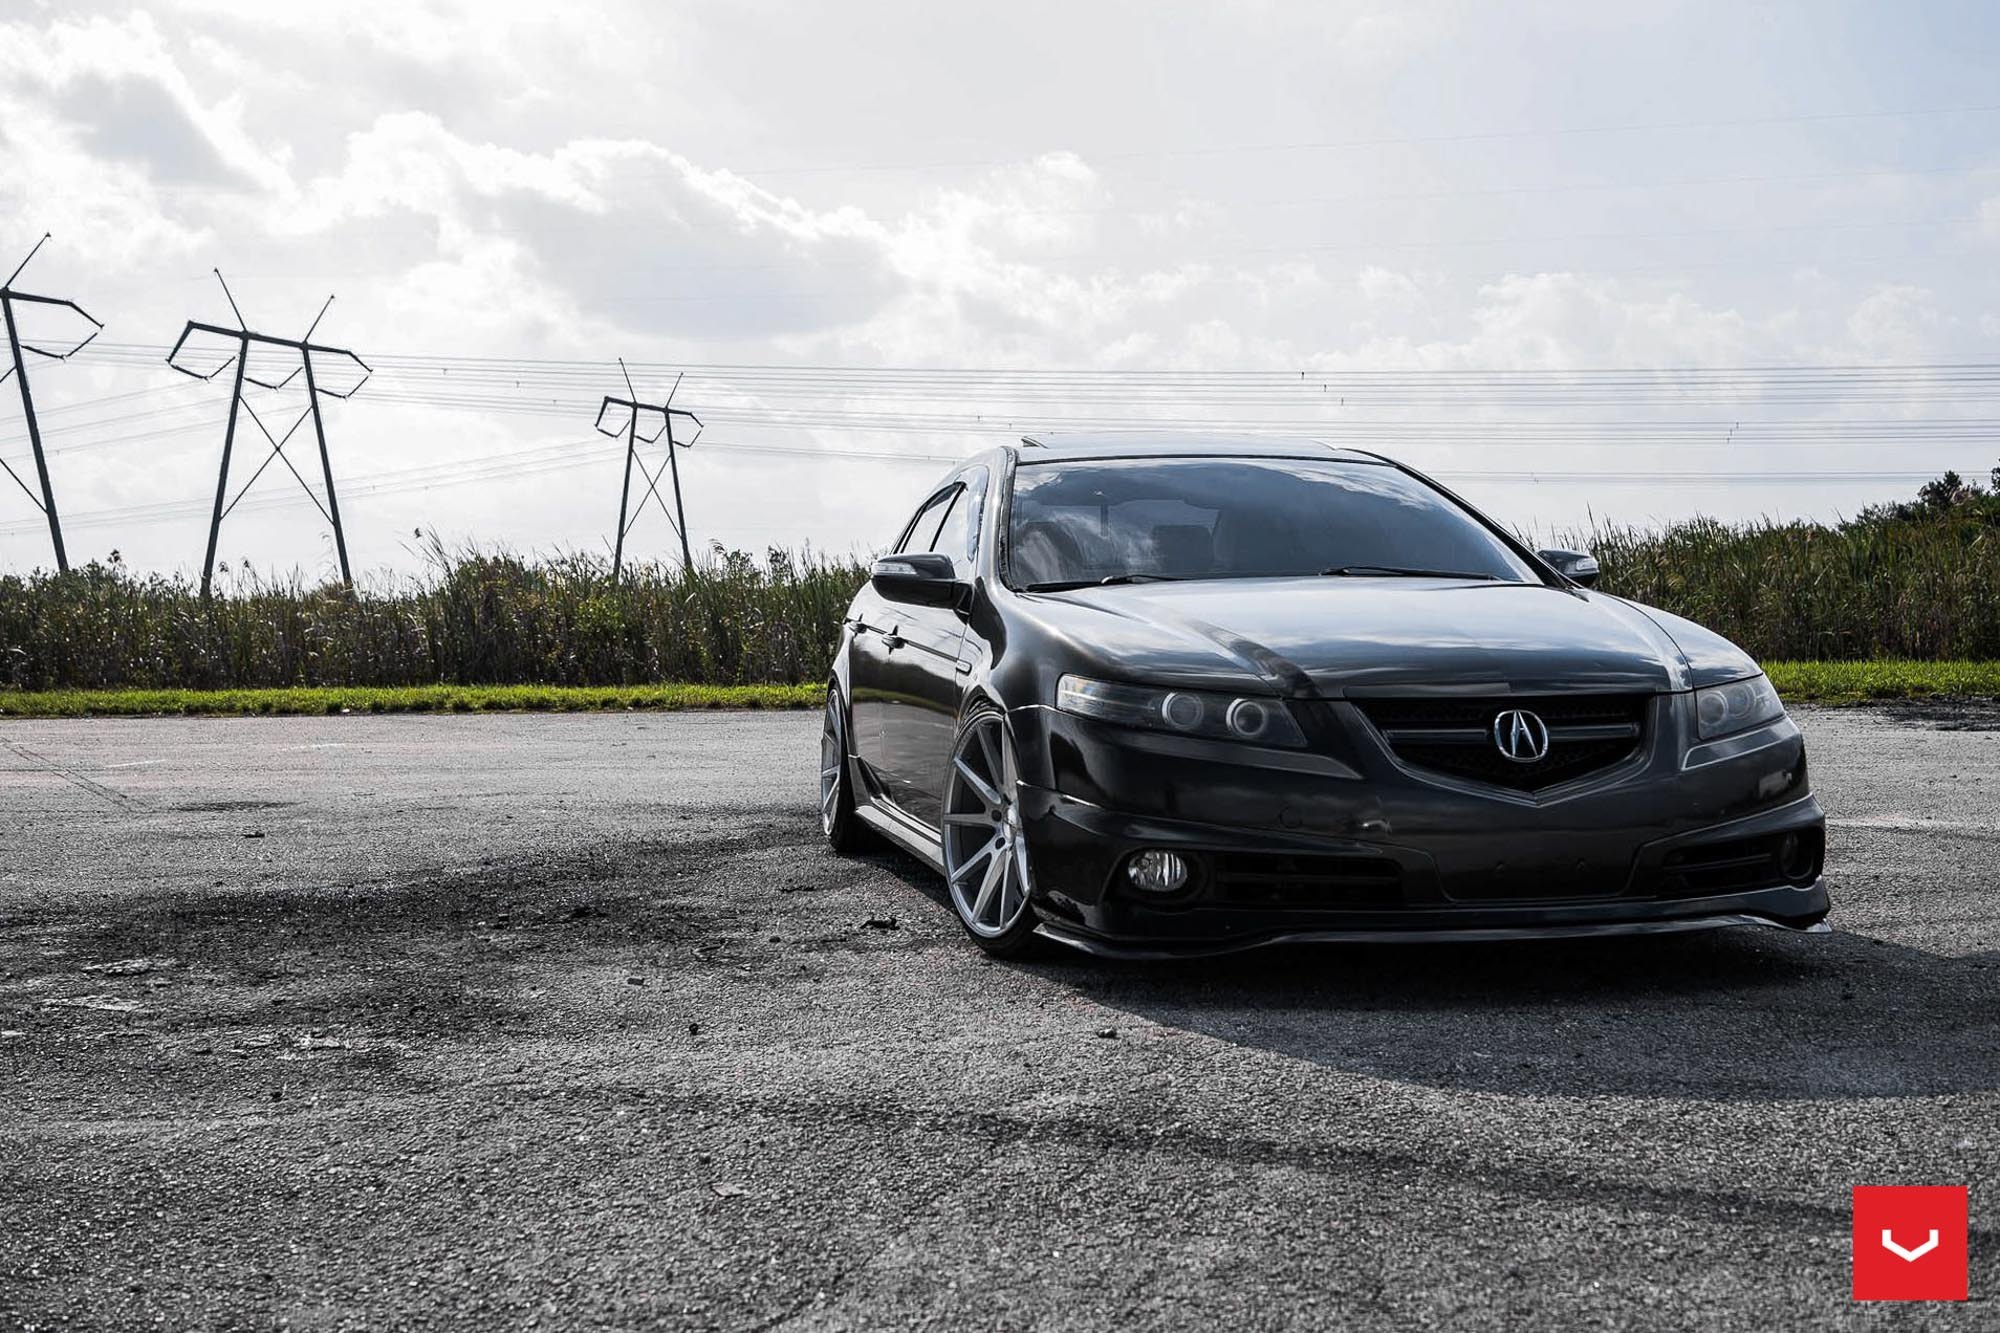 Stanced Acura TL With a Front Bumper Lip - Photo by Vossen